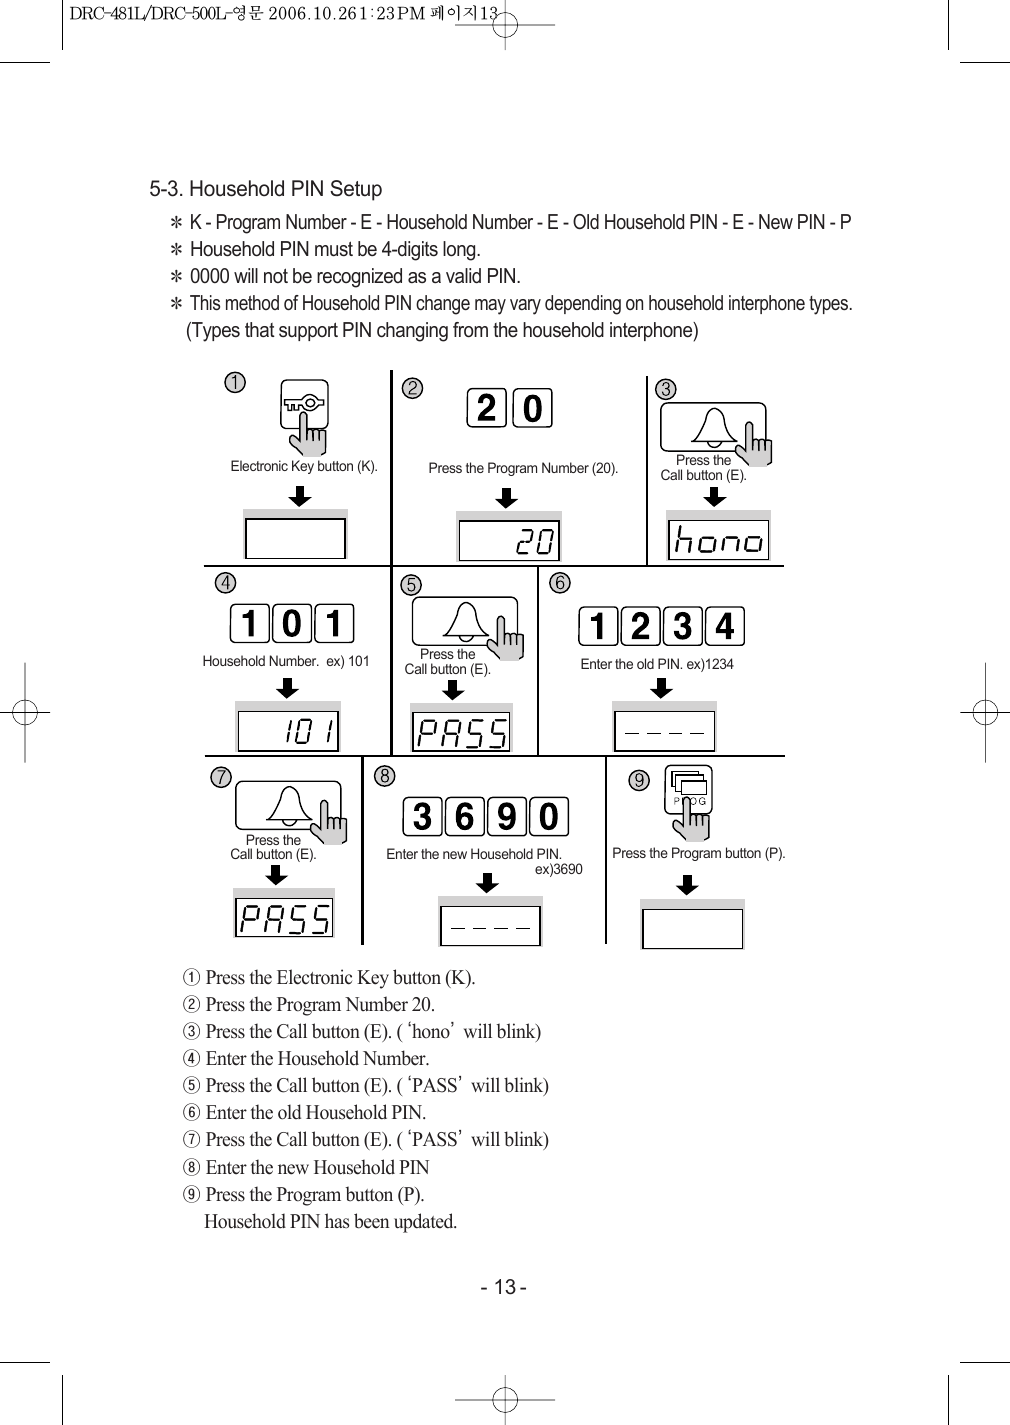 - 13 -5-3. Household PIN Setup󳀌K - Program Number - E - Household Number - E - Old Household PIN - E - New PIN - P󳀌Household PIN must be 4-digits long.󳀌0000 will not be recognized as a valid PIN.󳀌This method of Household PIN change may vary depending on household interphone types.(Types that support PIN changing from the household interphone)①Press the Electronic Key button (K).②Press the Program Number 20.③Press the Call button (E). (‘hono’will blink)④Enter the Household Number.⑤Press the Call button (E). (‘PASS’will blink)⑥Enter the old Household PIN.⑦Press the Call button (E). (‘PASS’will blink)⑧Enter the new Household PIN⑨Press the Program button (P).Household PIN has been updated.Press the Program button (P).Press the Call button (E).Electronic Key button (K). Press the Program Number (20).Enter the old PIN. ex)1234Enter the new Household PIN. ex)3690Household Number.  ex) 101 Press the Call button (E).Press the Call button (E).DRC-481L/DRC-500L-영 문   2006.10.26 1:23 PM  페이지13